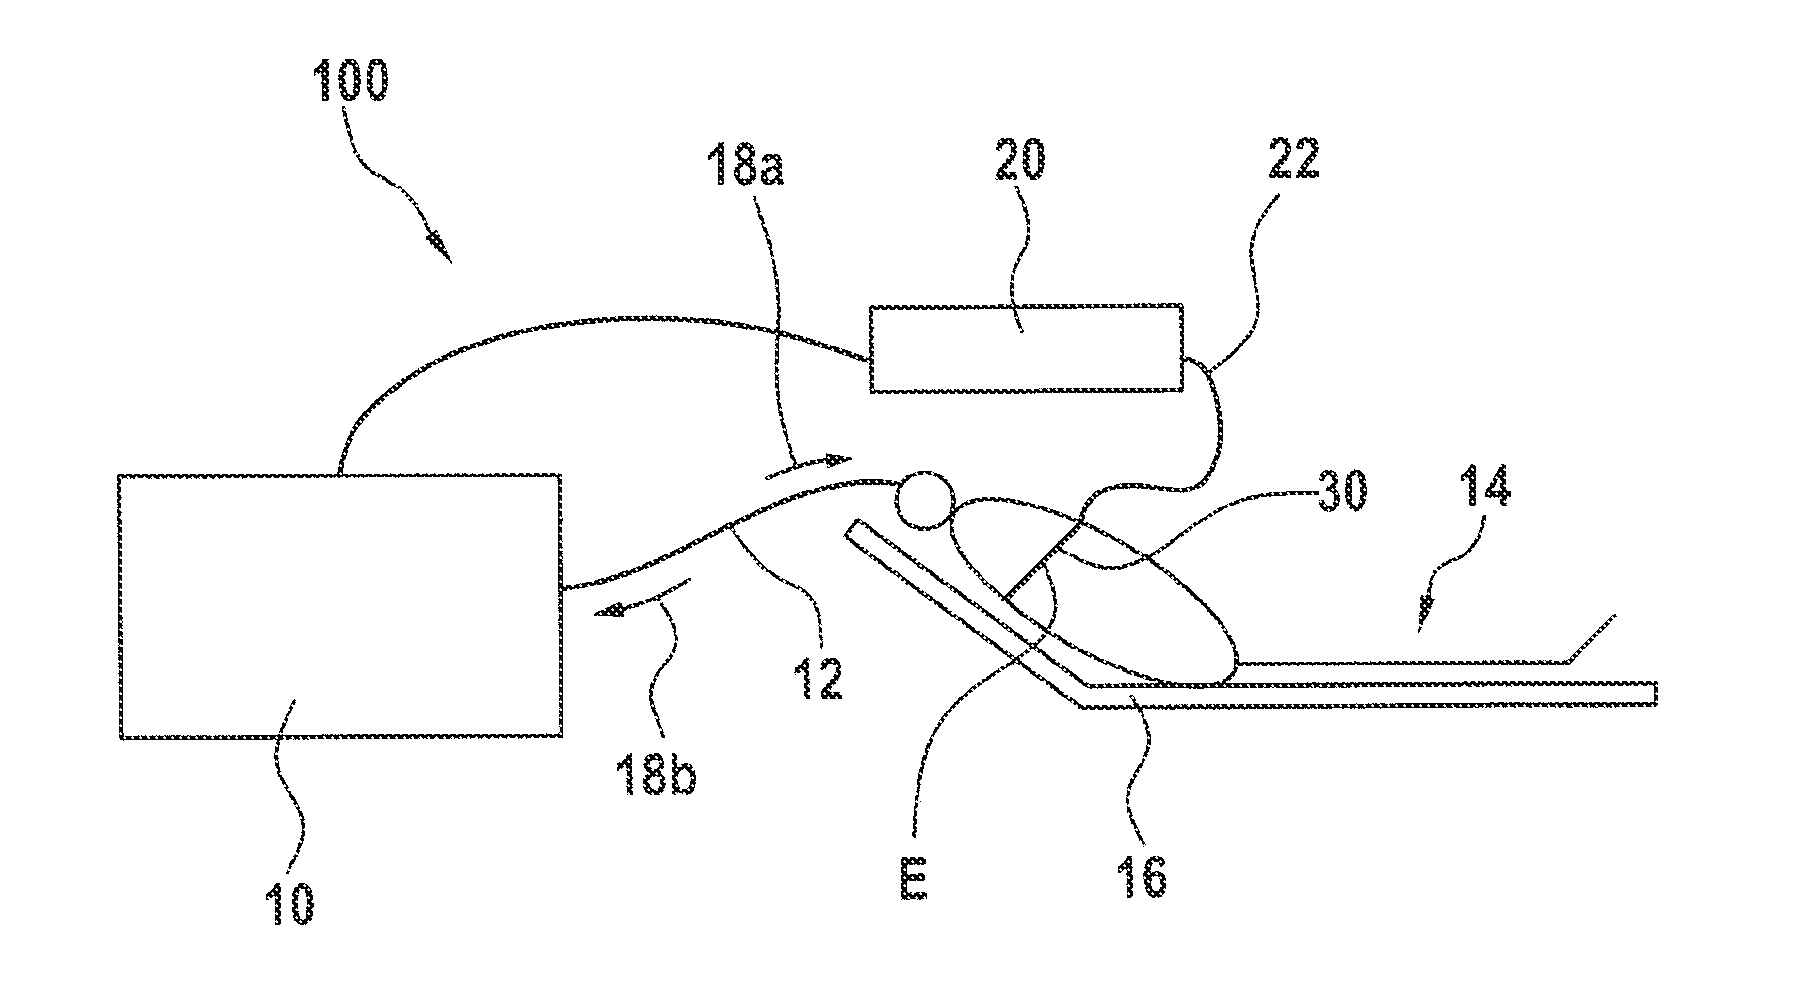 System for automated adjustment of a pressure set by a respiration device